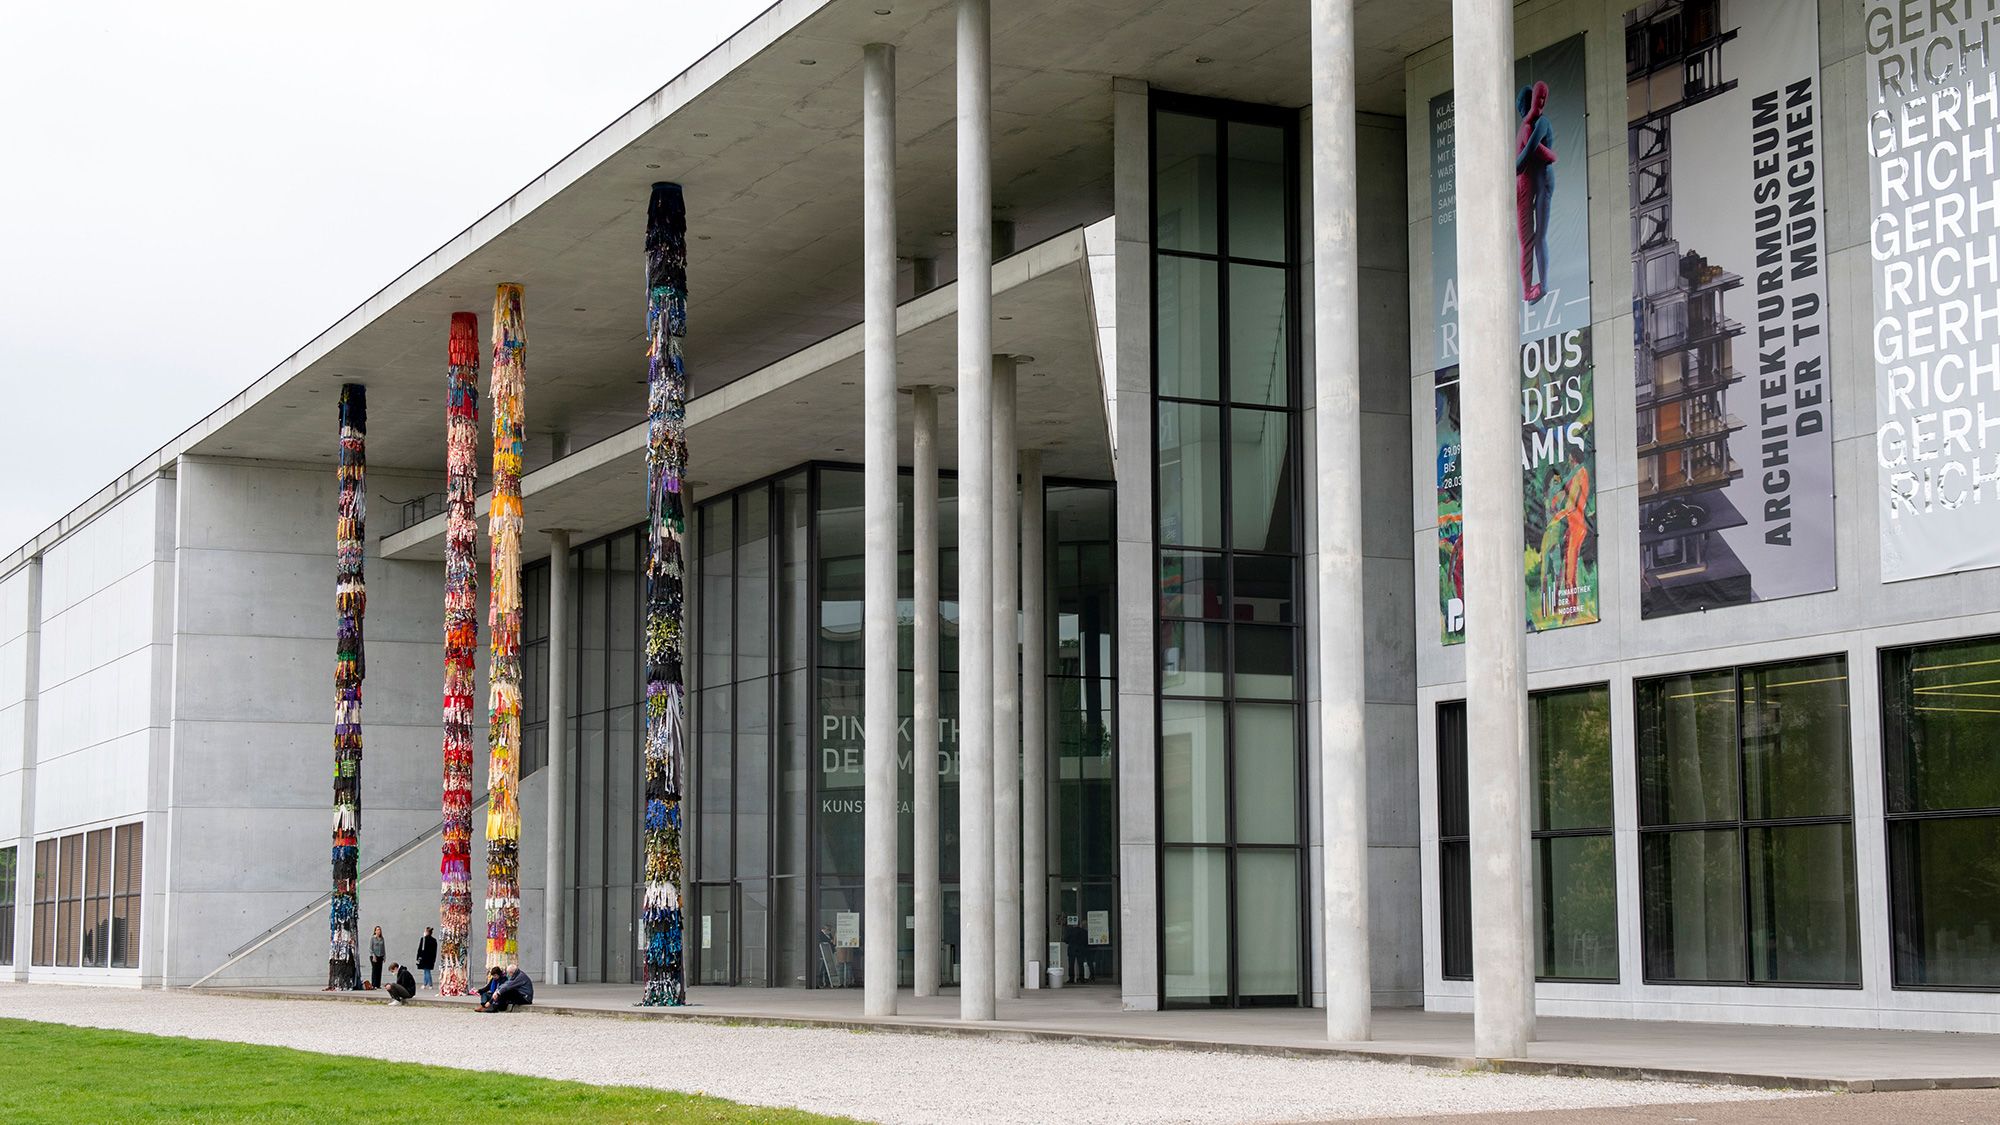 German museum worker fired after hanging his own art in gallery